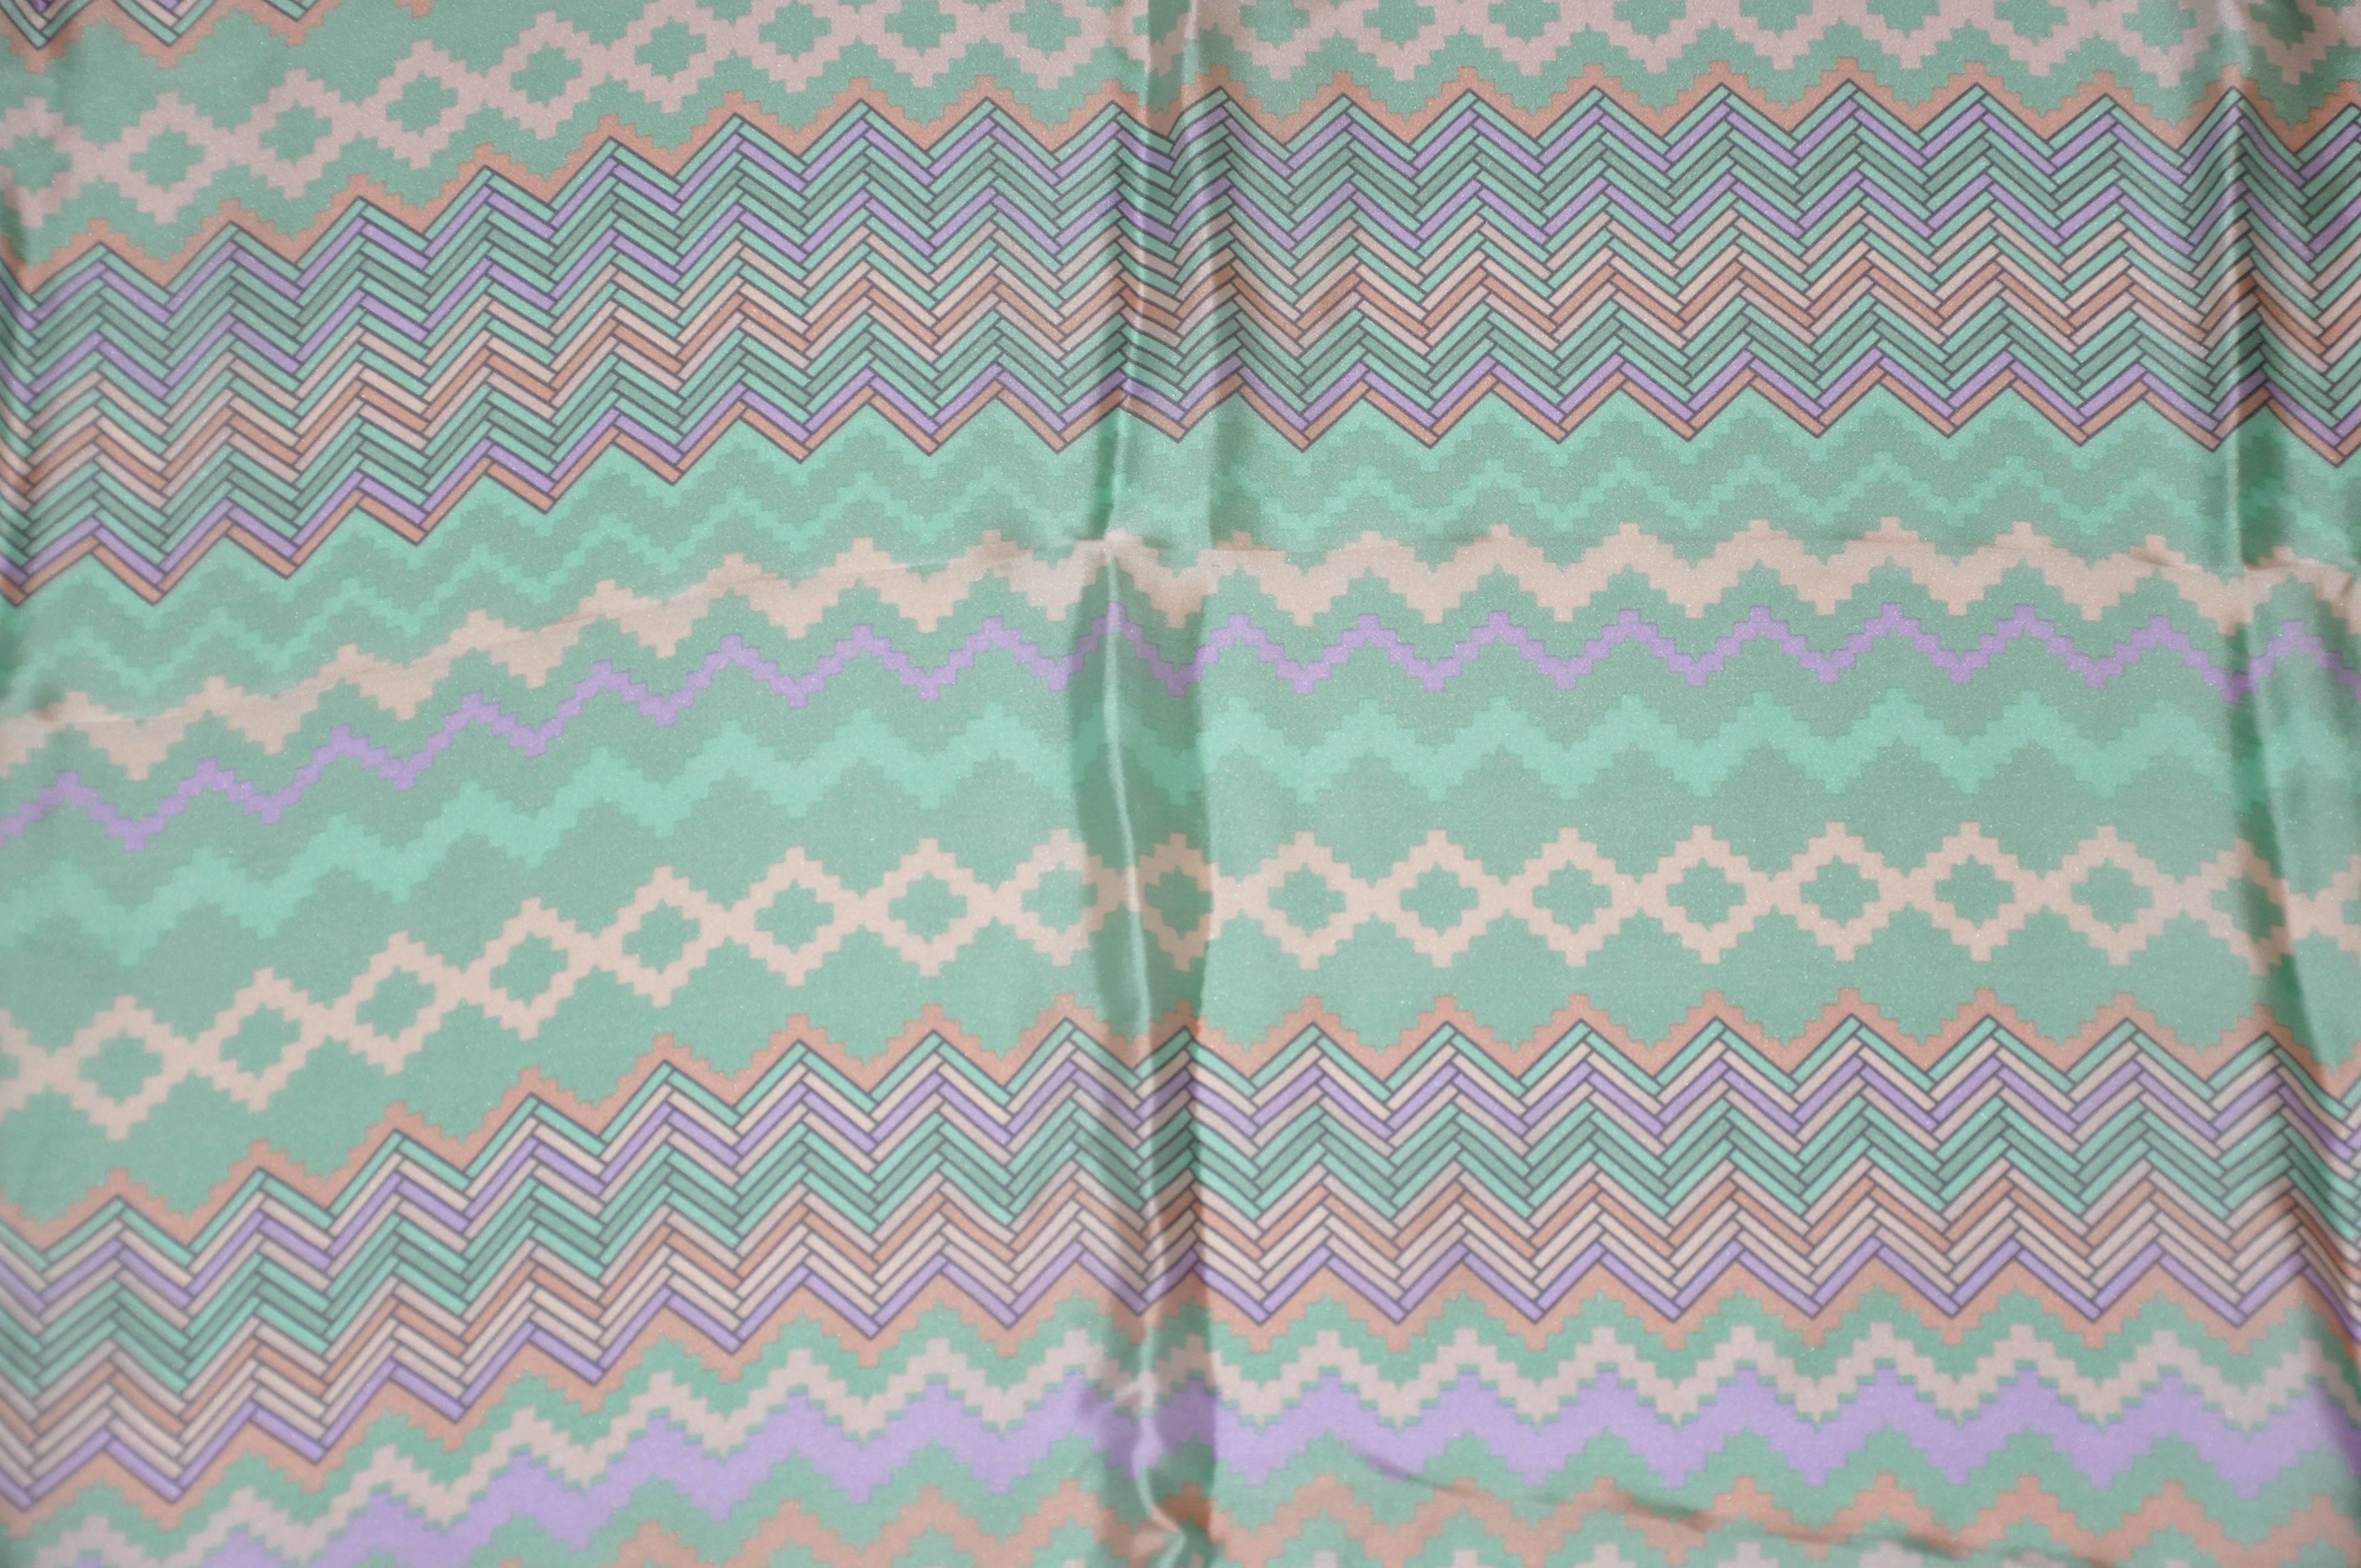        Missoni powder green border with multi-color zig-zag center silk scarf is finished with hand-rolled edges and measures 34" x 34". Made in Italy.